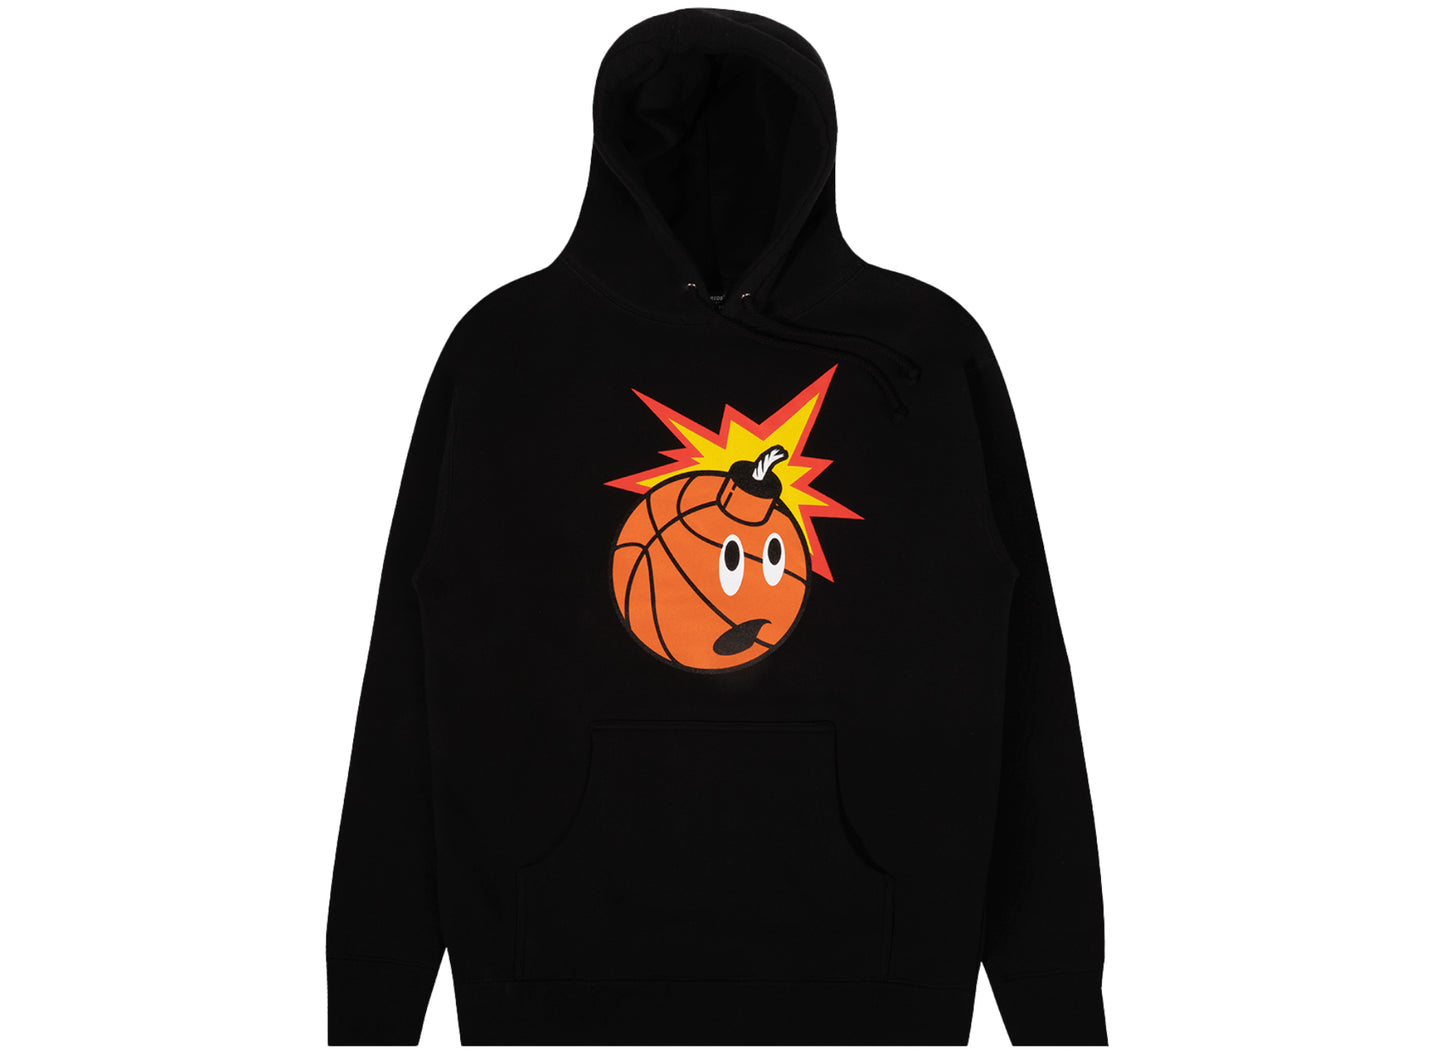 The Hundreds Oneness Madness Pullover Hoodie